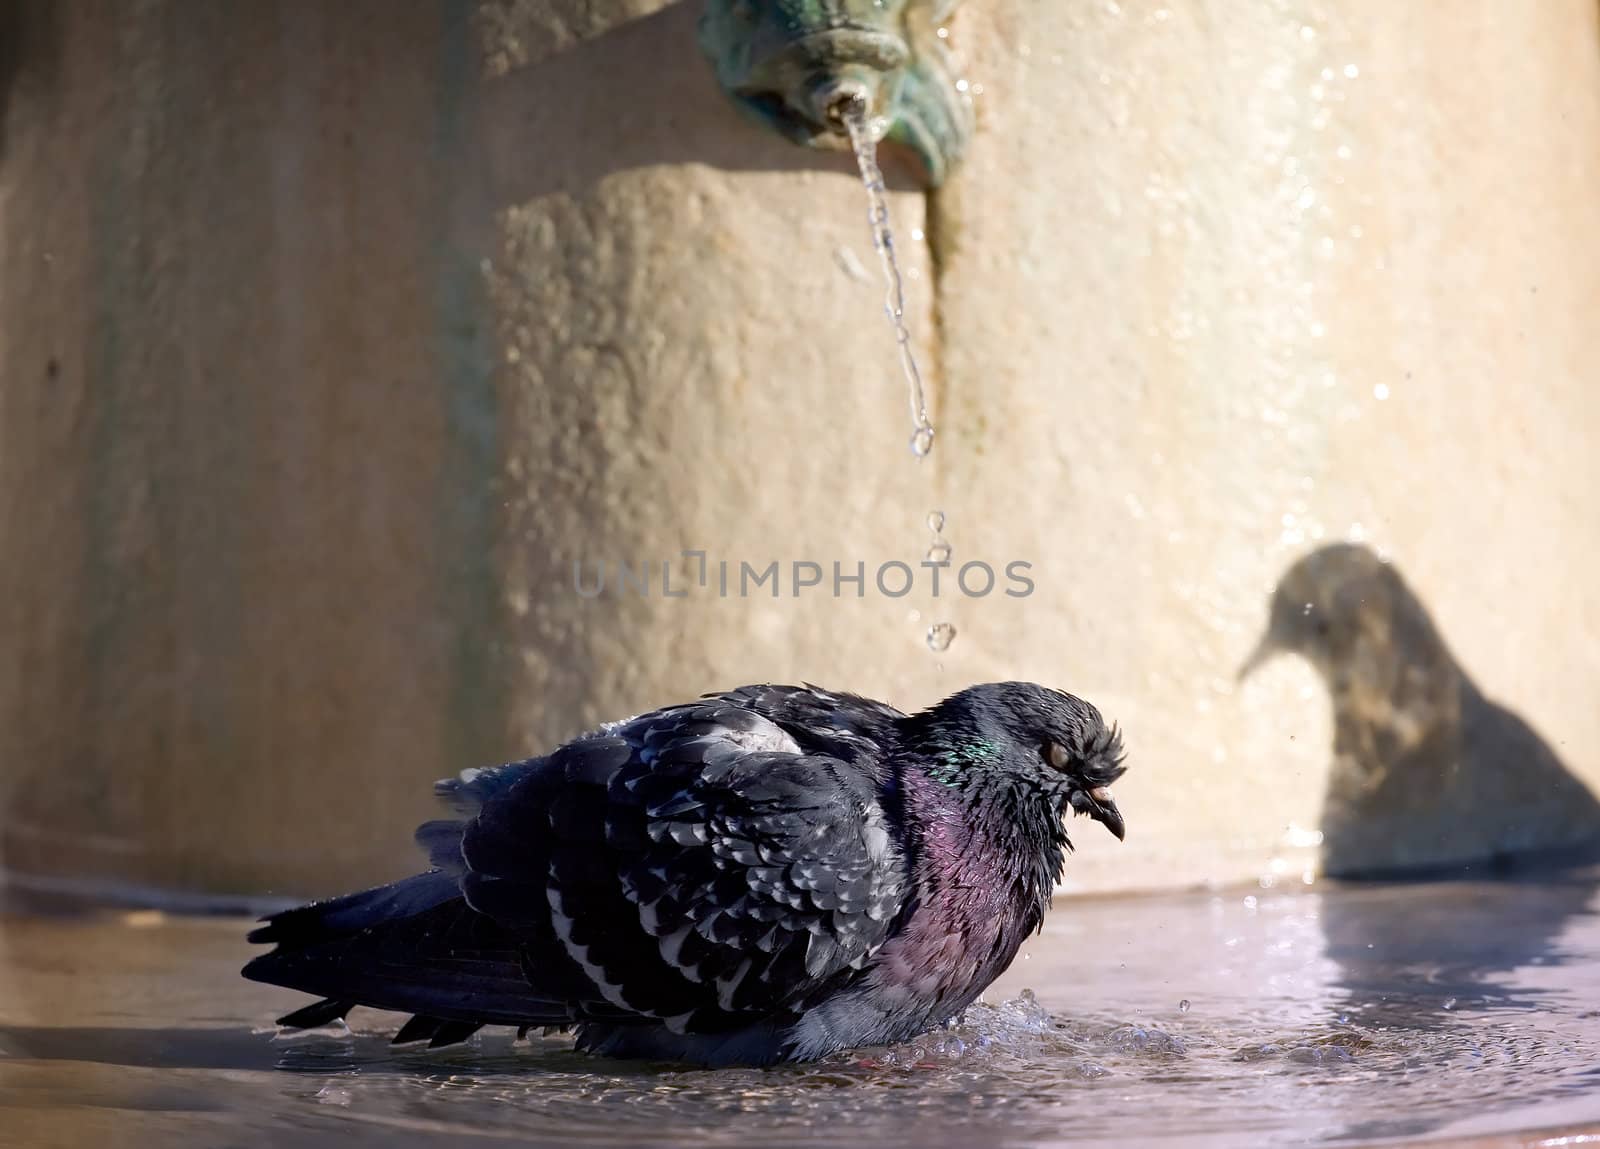 Pigeon taking a bath in a city fountain  and a shadow of another pigeon watching him